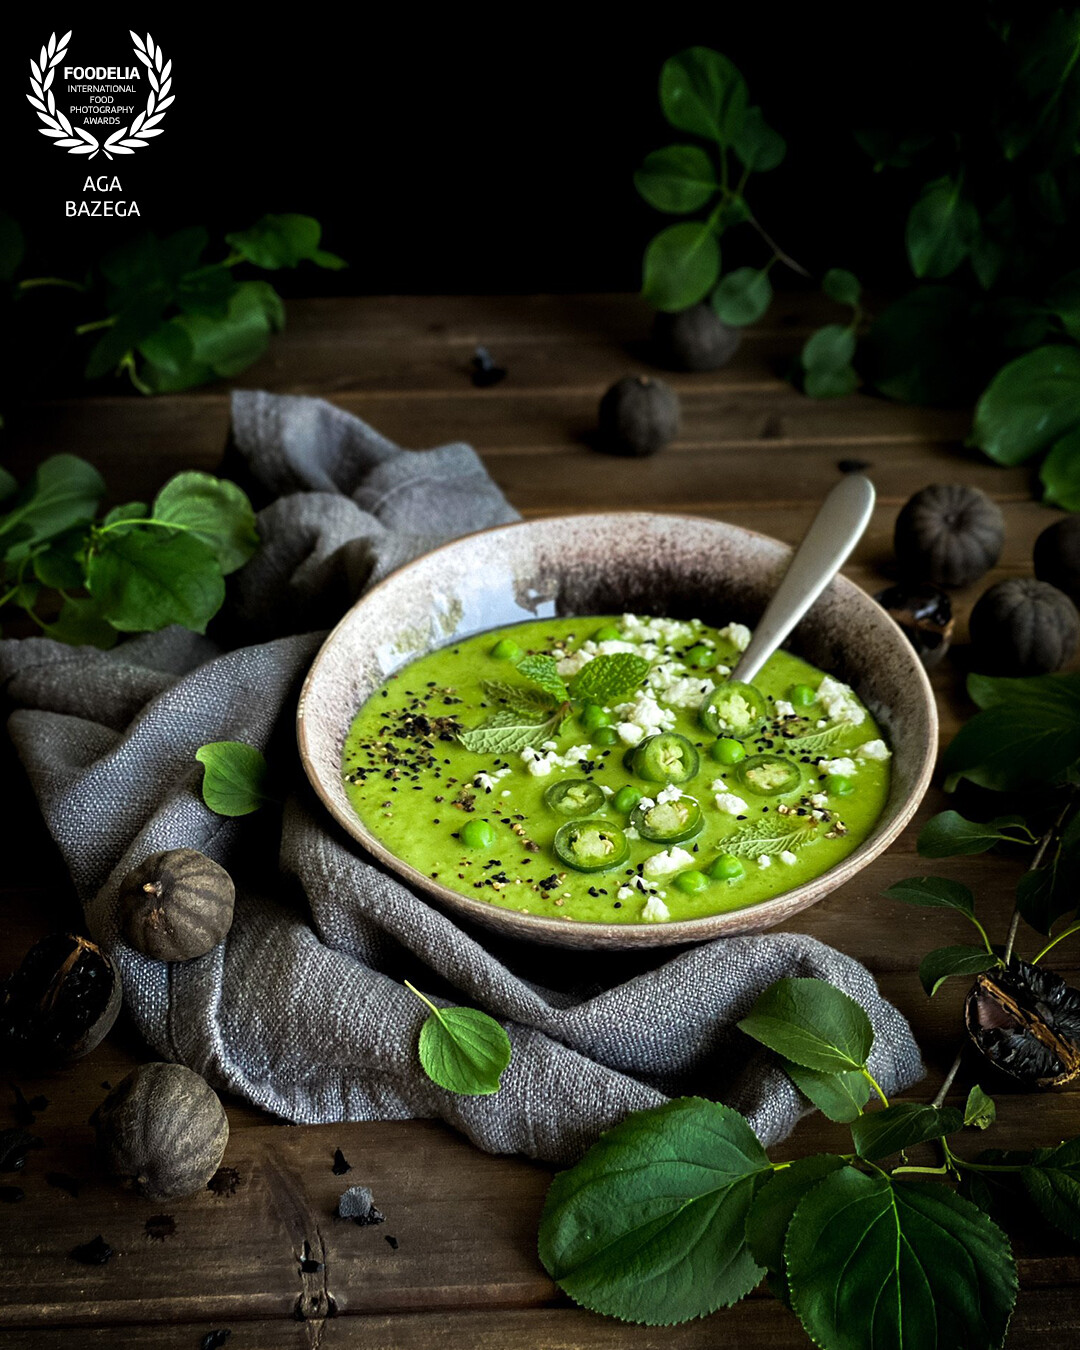 Pea soup, served with feta cheese. Image created for a photography challenge.